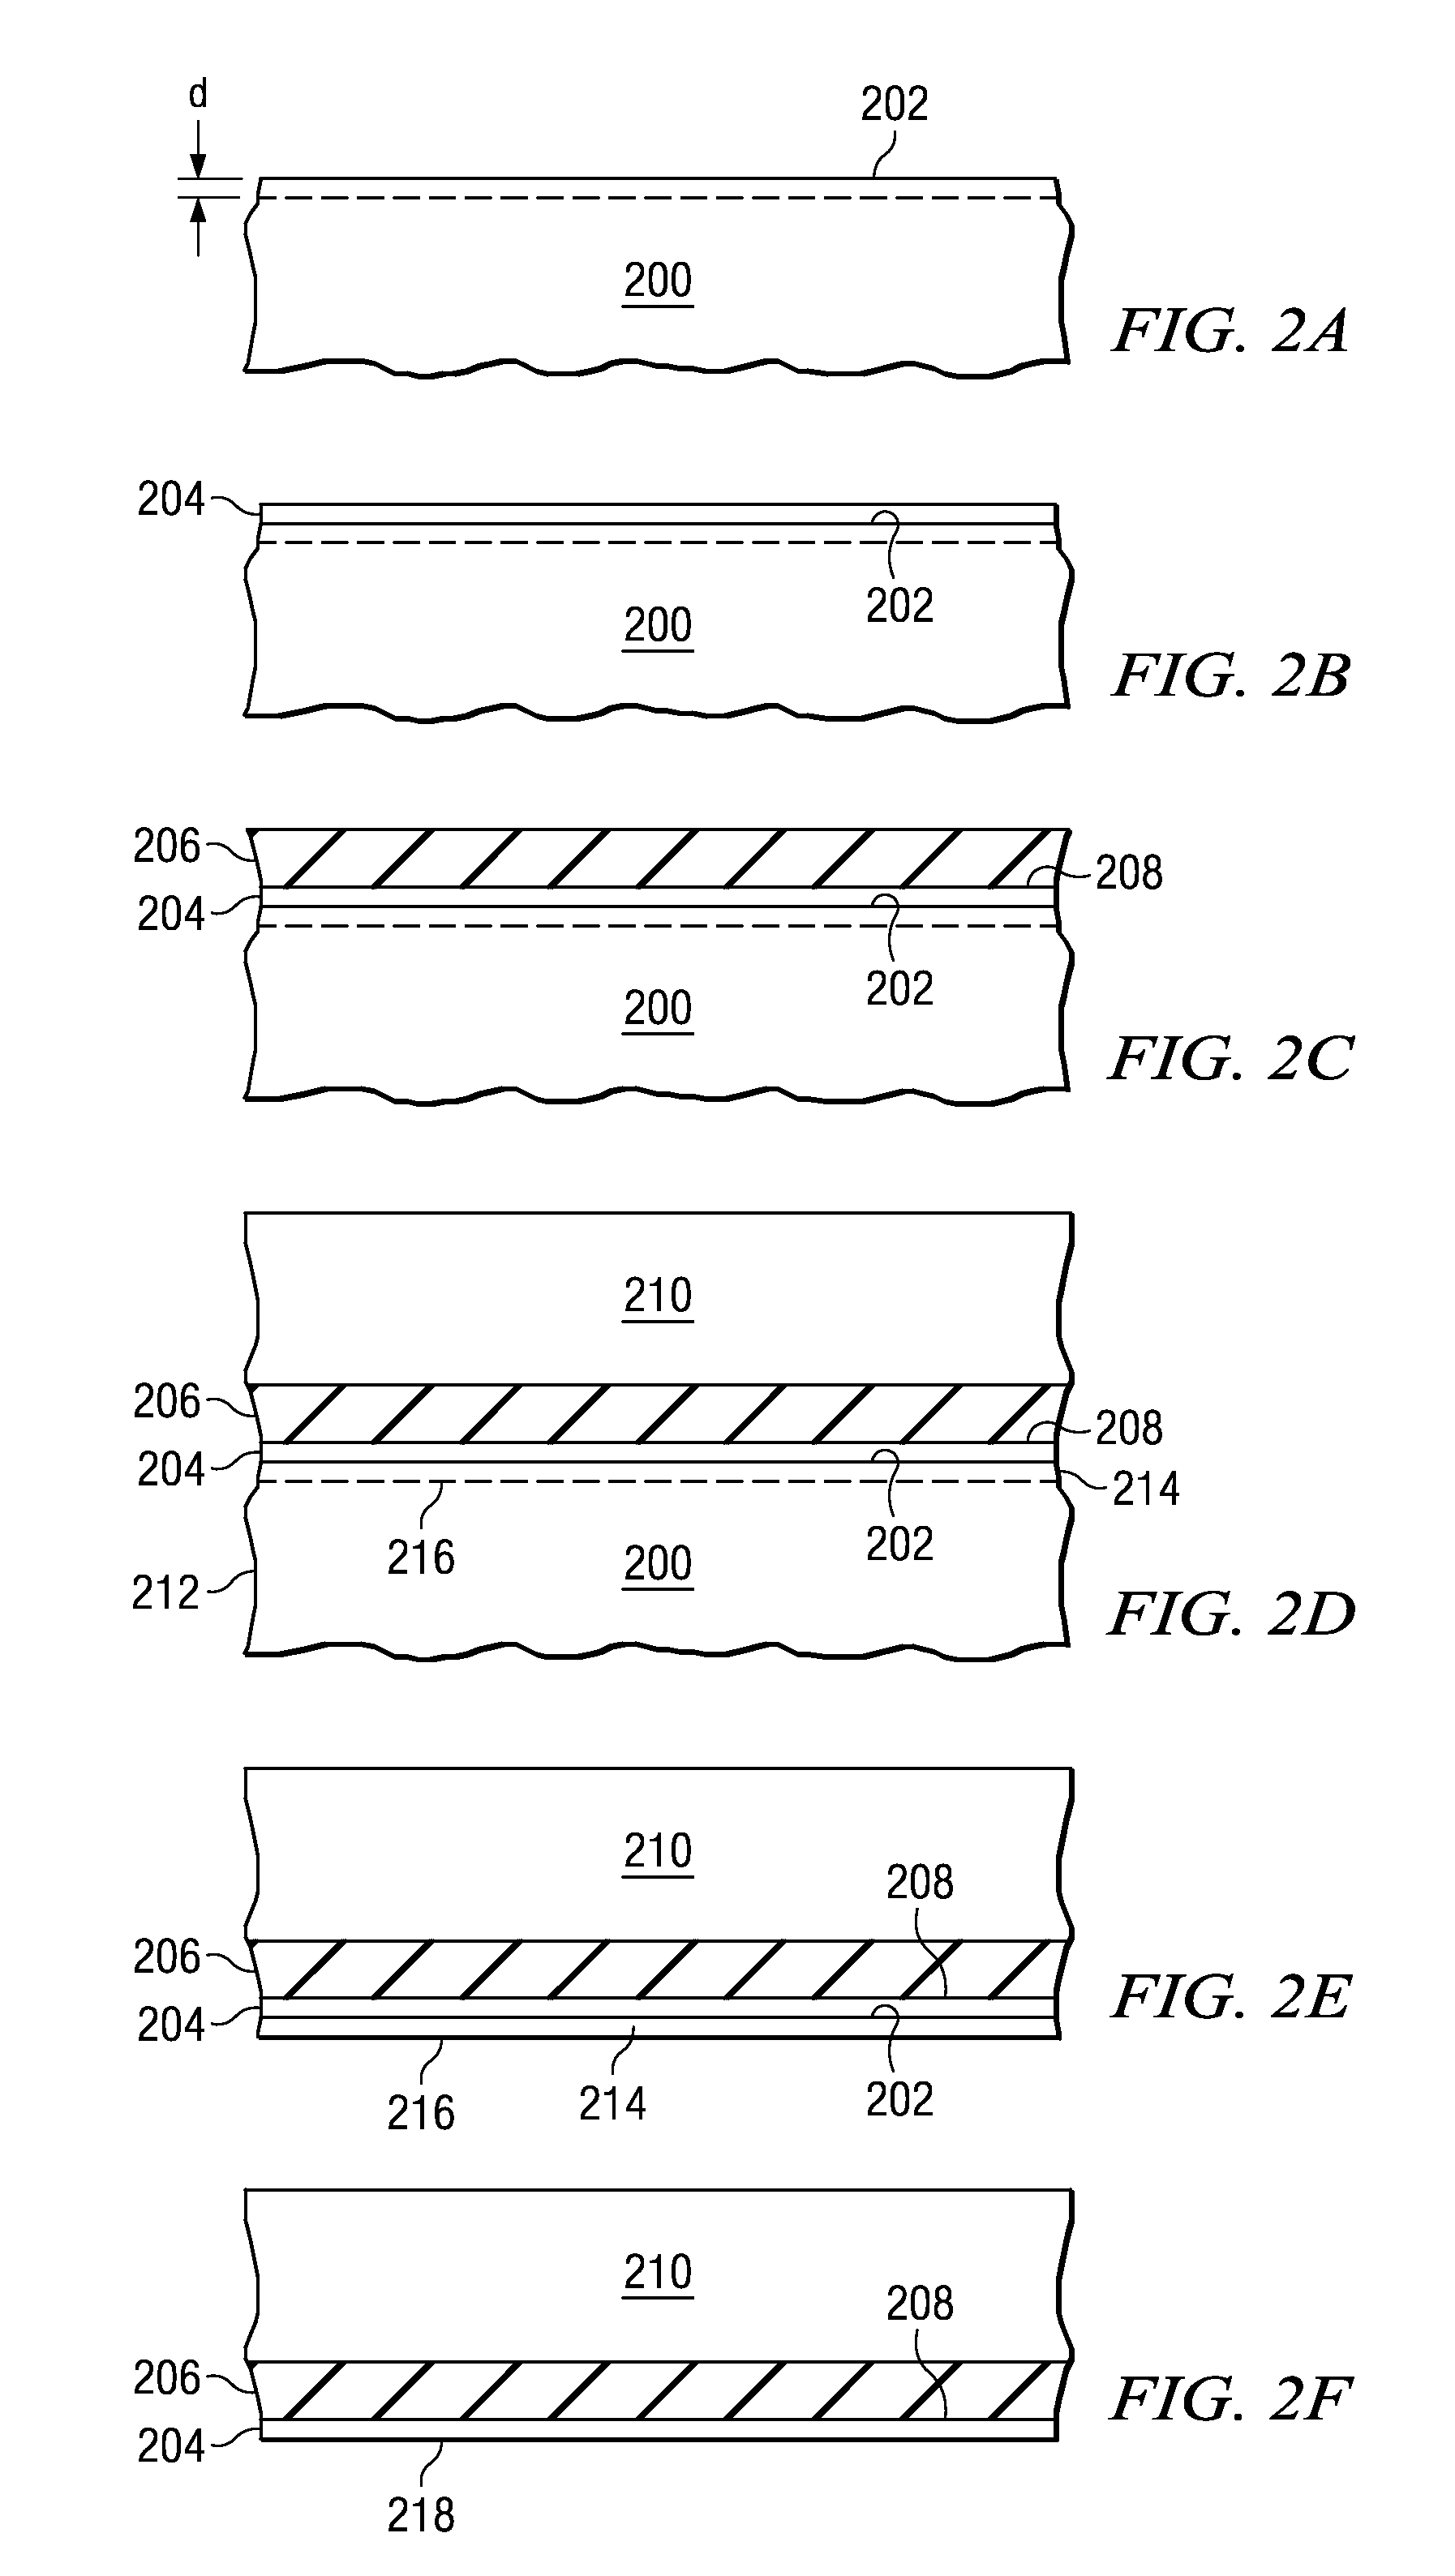 Creation of thin group ii-vi monocrystalline layers by ion cutting techniques